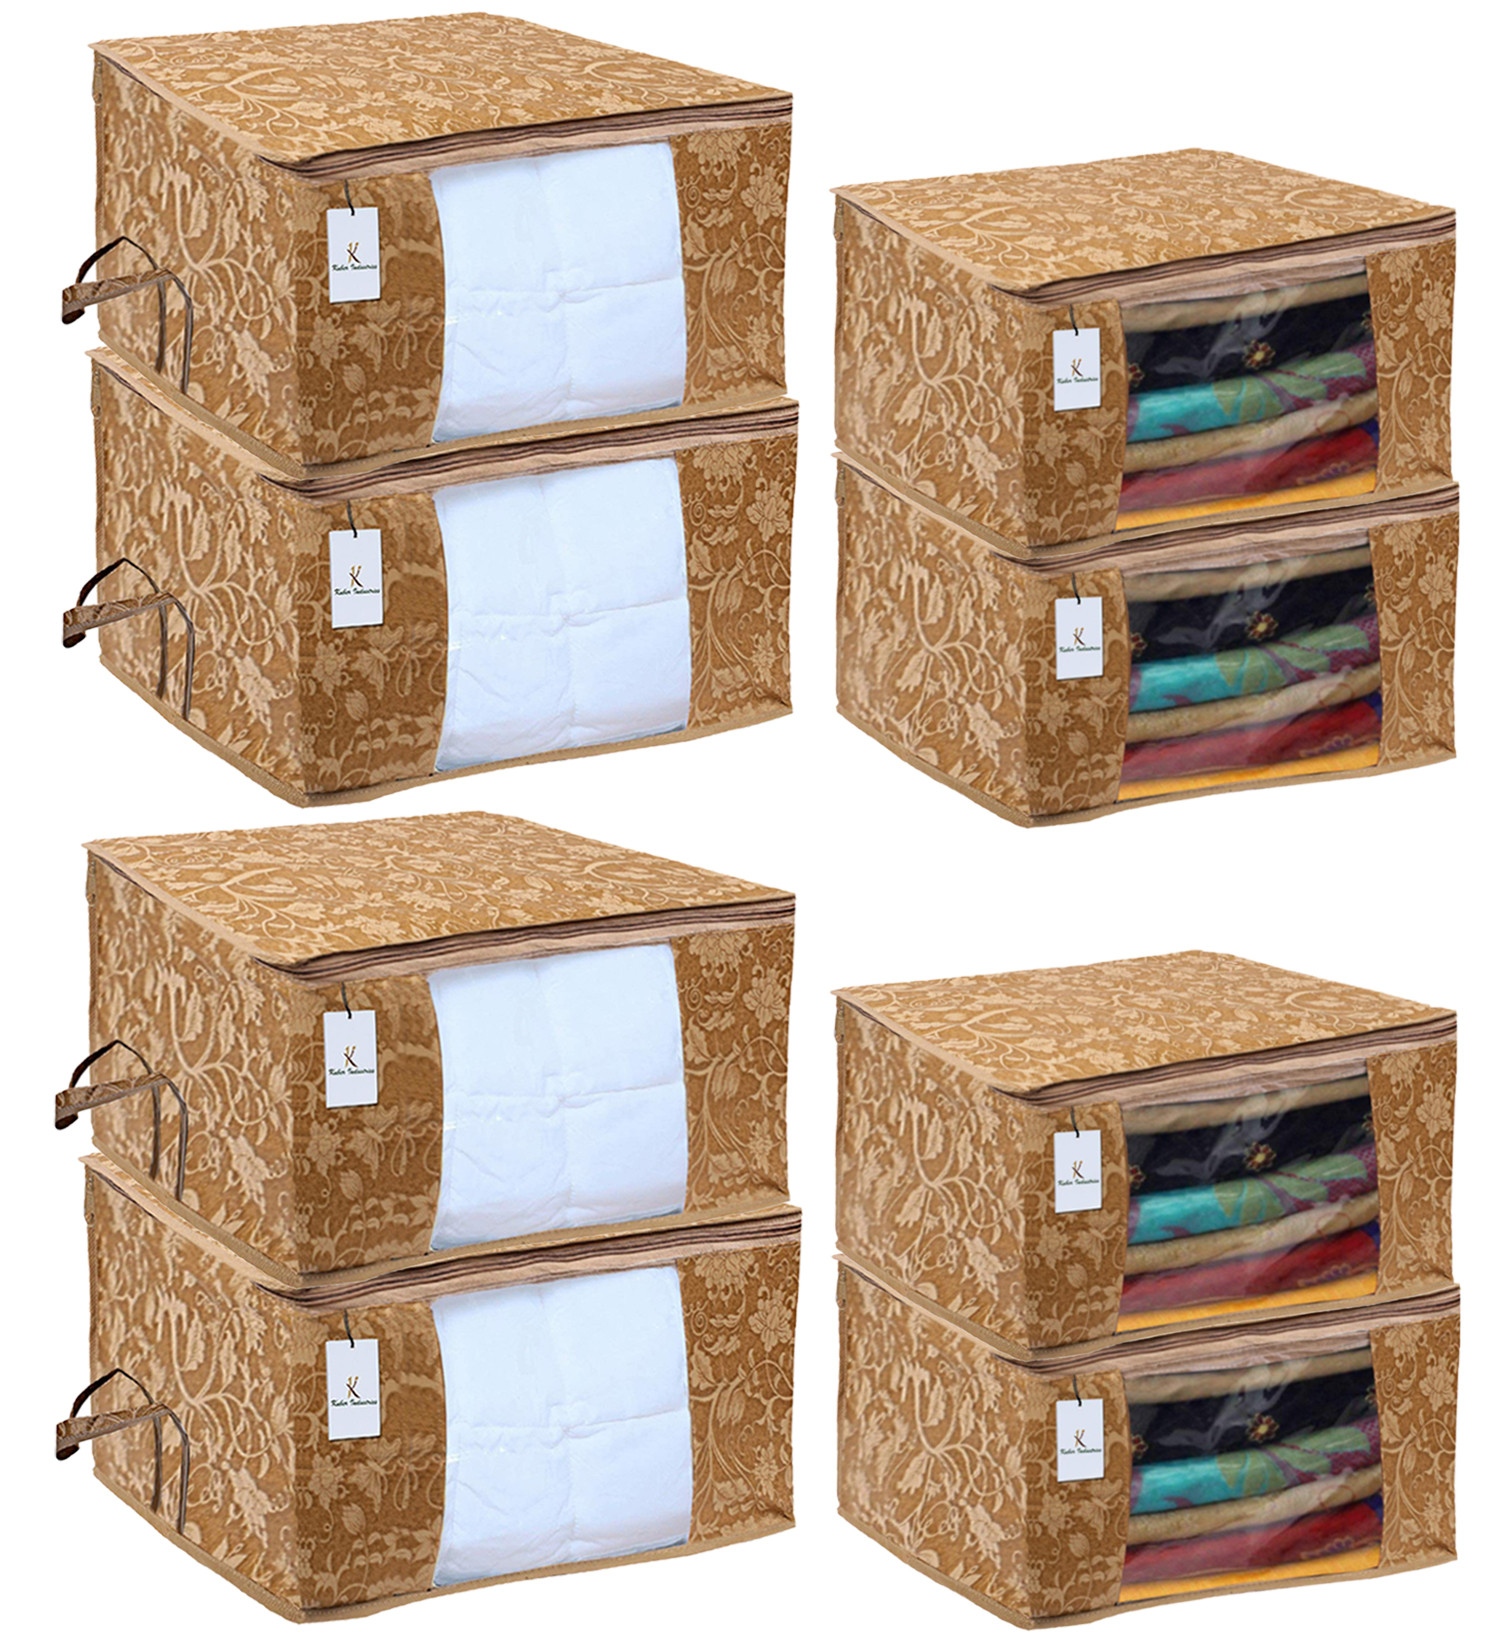 Kuber Industries Metallic Printed Non Woven Saree Cover And Underbed Storage Bag, Cloth Organizer For Storage, Blanket Cover Combo Set (Beige) -CTKTC38559